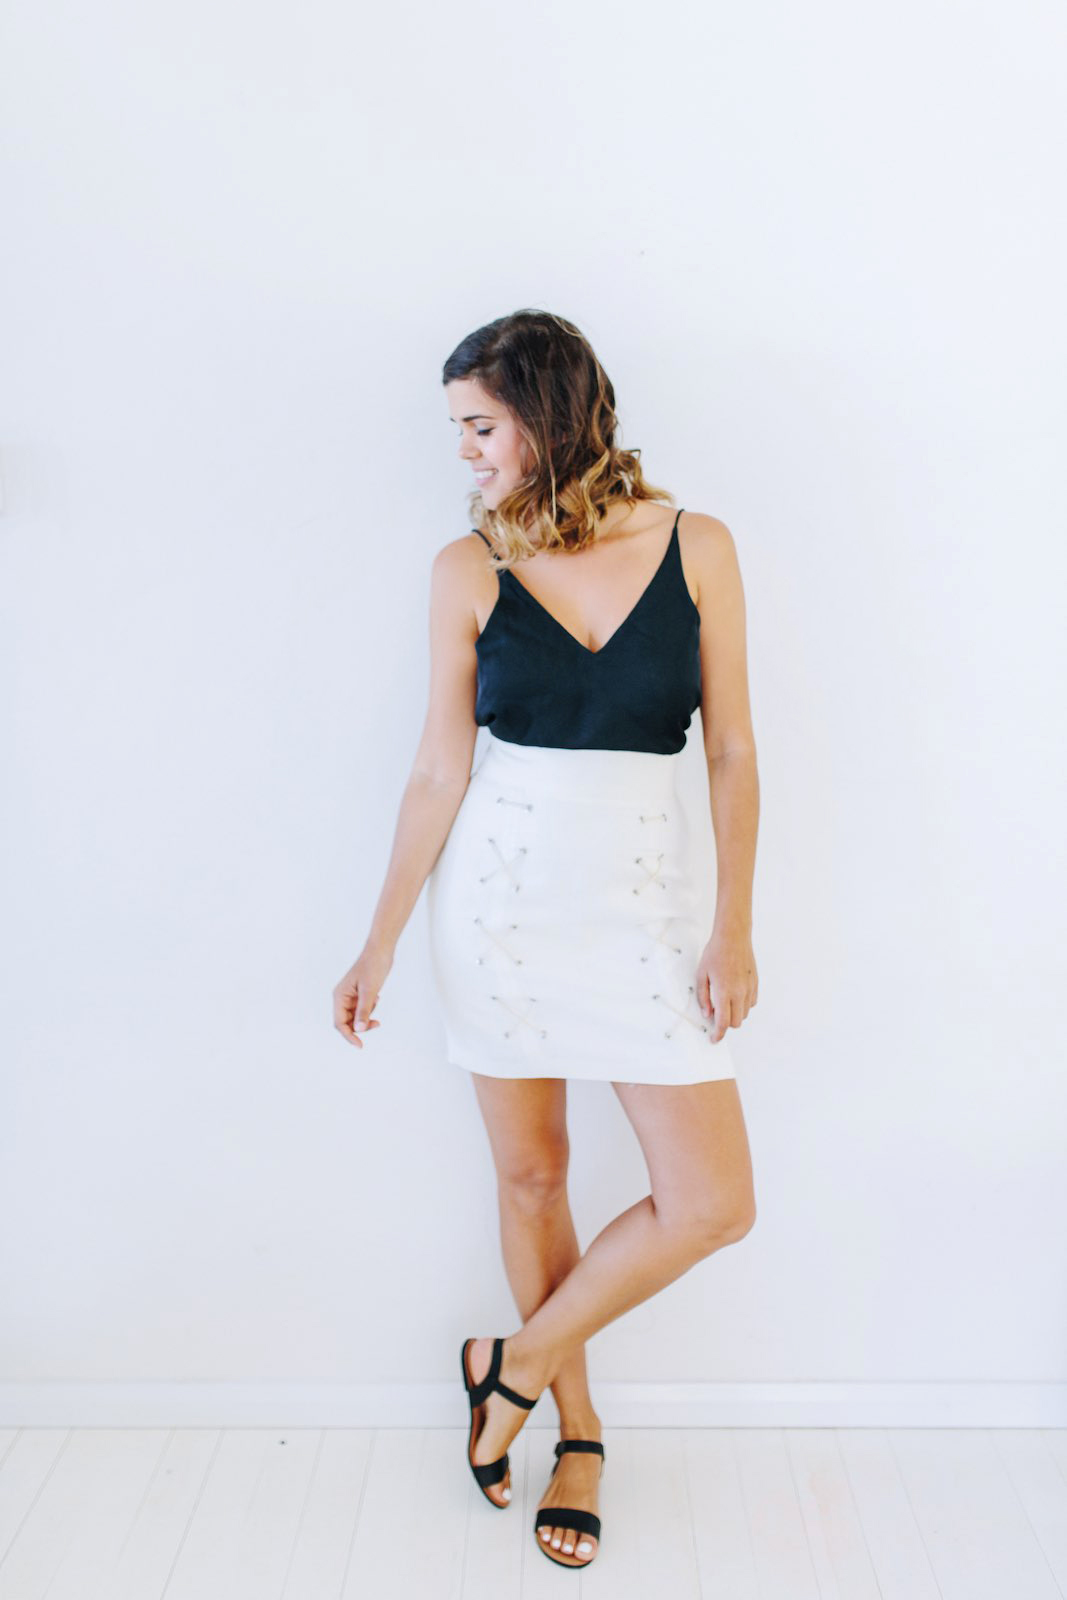 DIY Lace Up Skirt